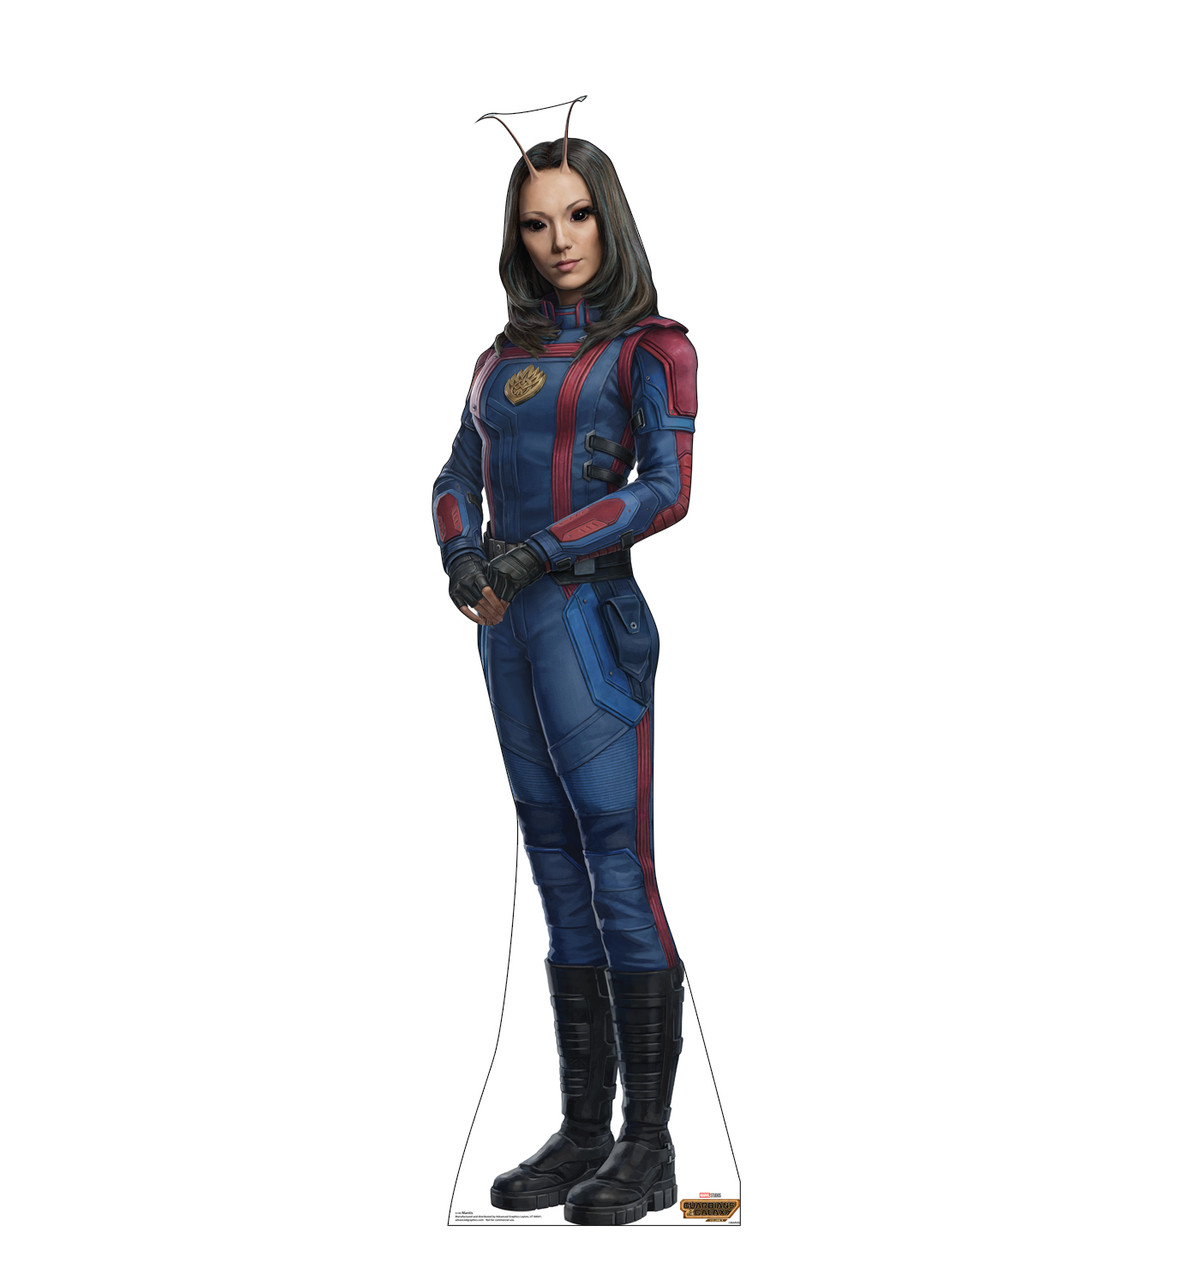 Life-size cardboard standee of Mantis.